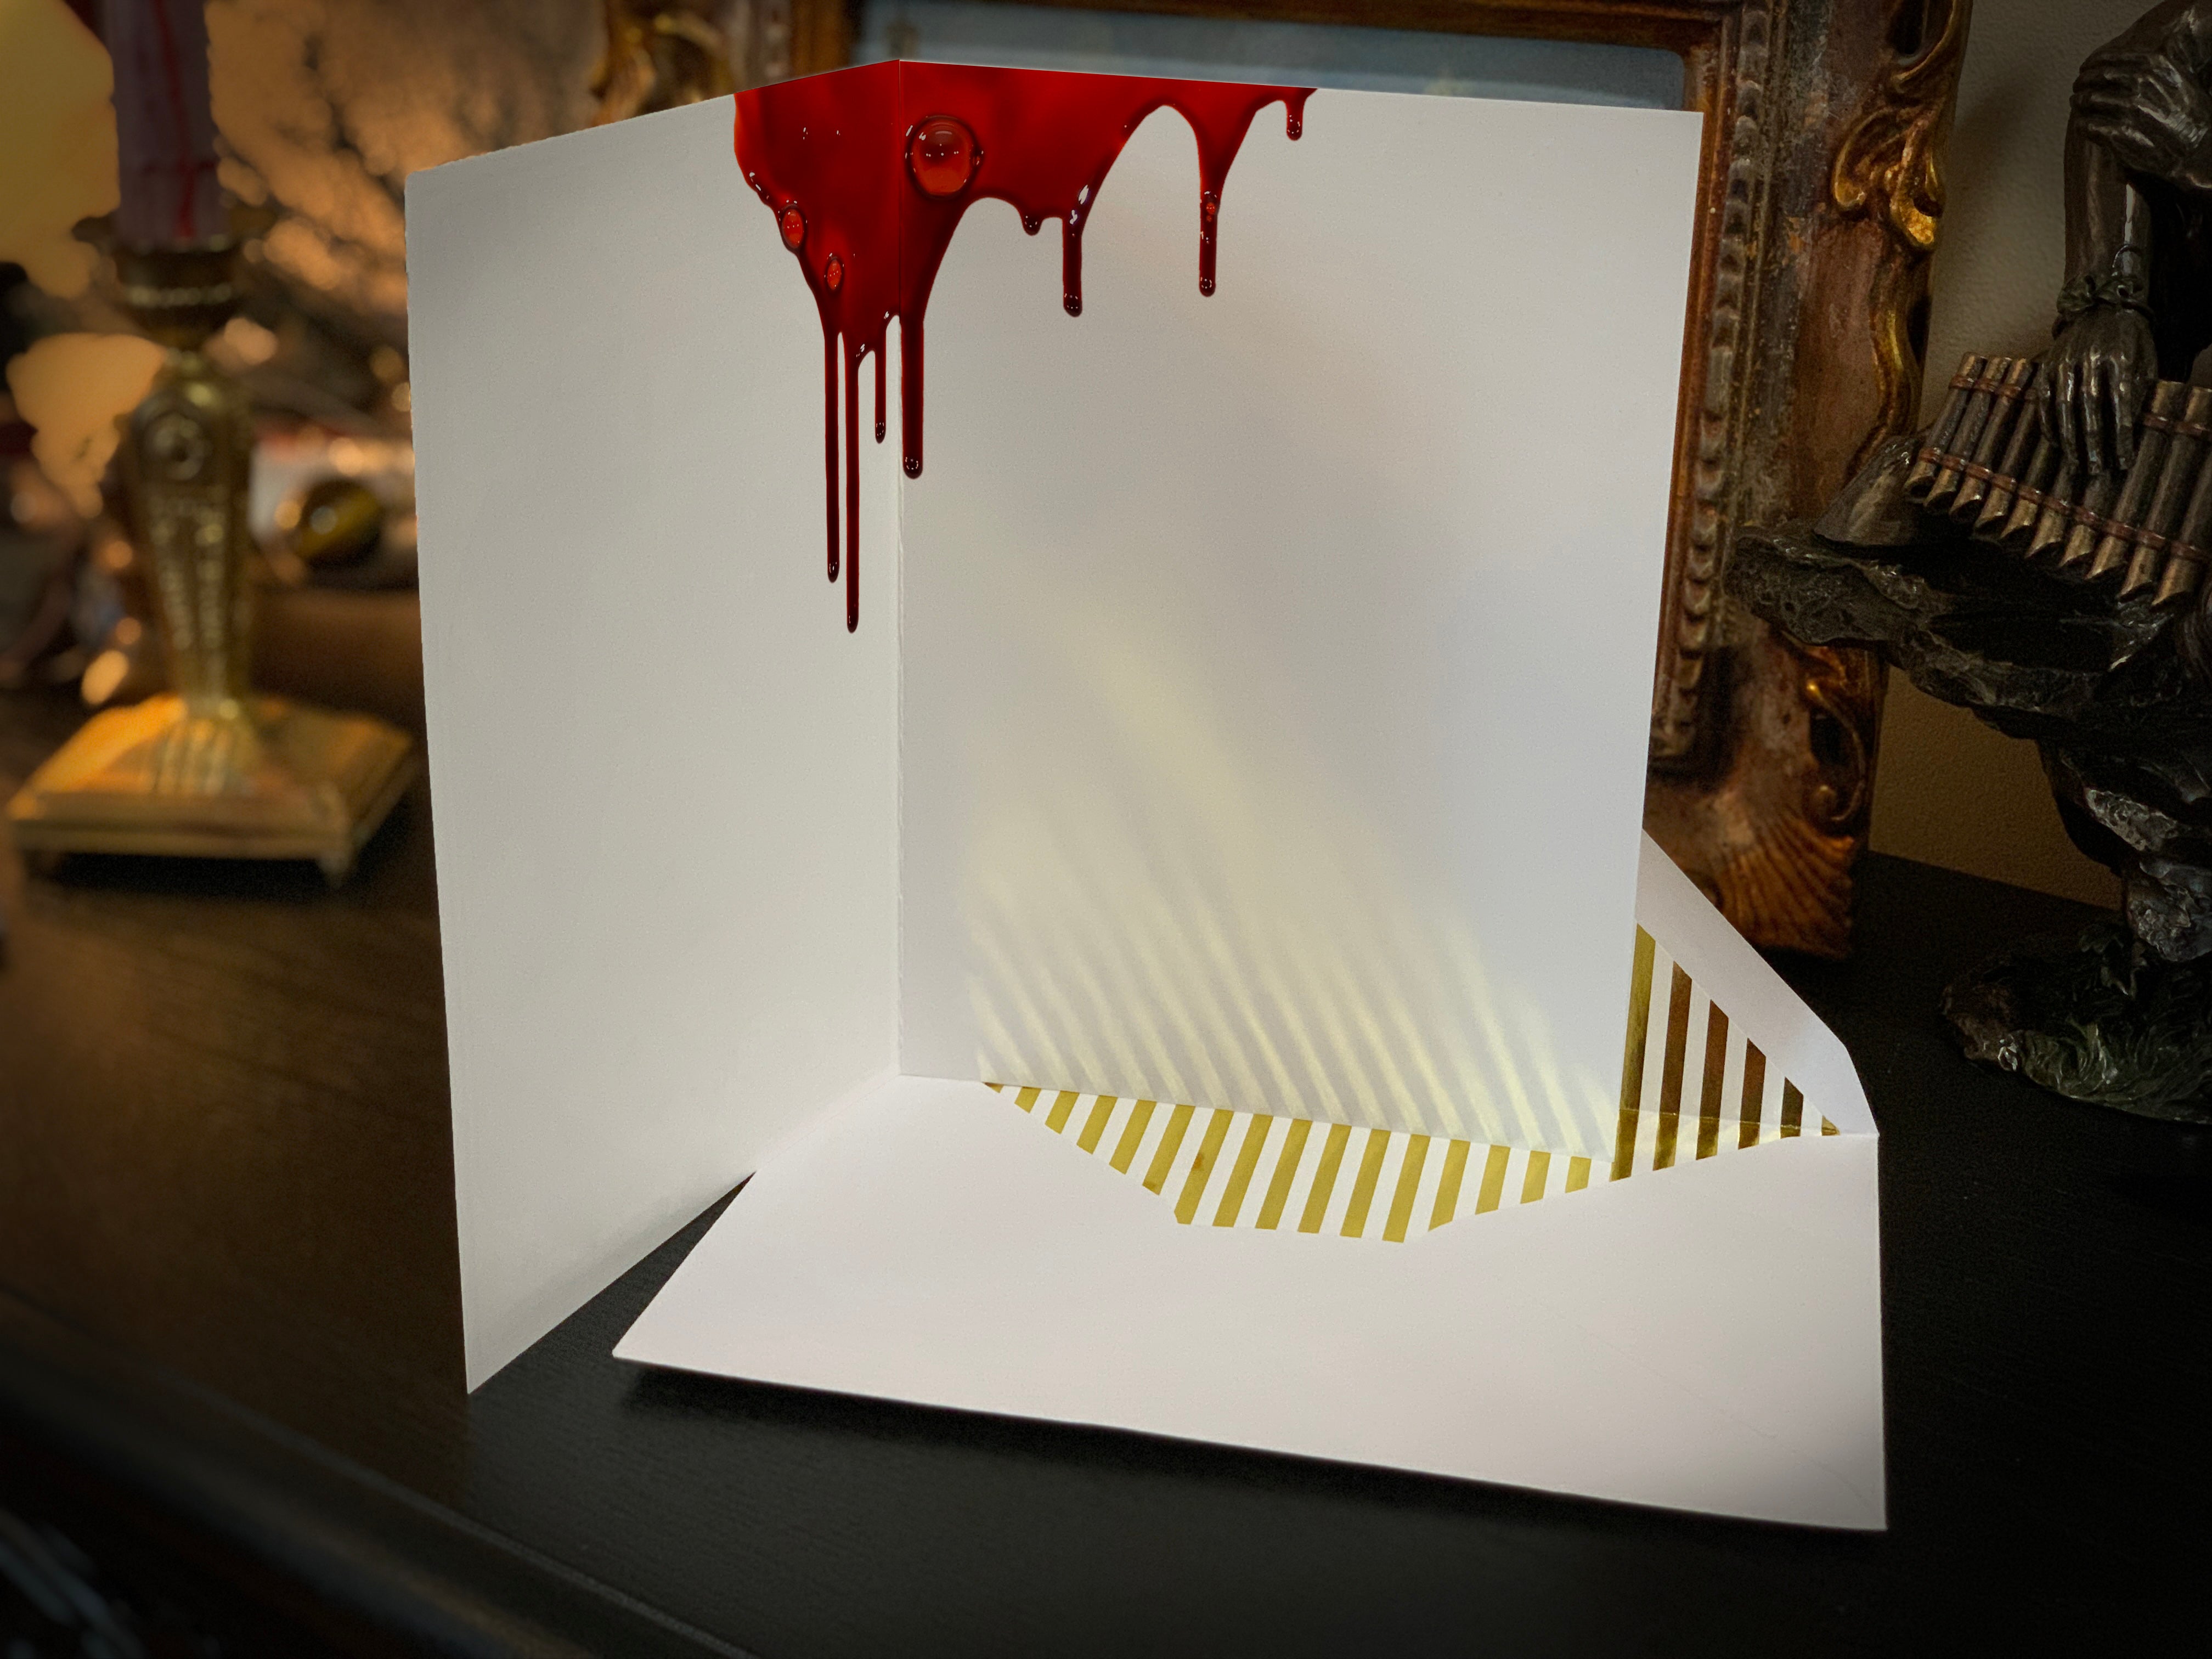 Blood Canticle, Sacred and Profane Reliquary, Gothic Greeting Card with Elegant Striped Gold Foil Envelope, 1 Card/Envelope